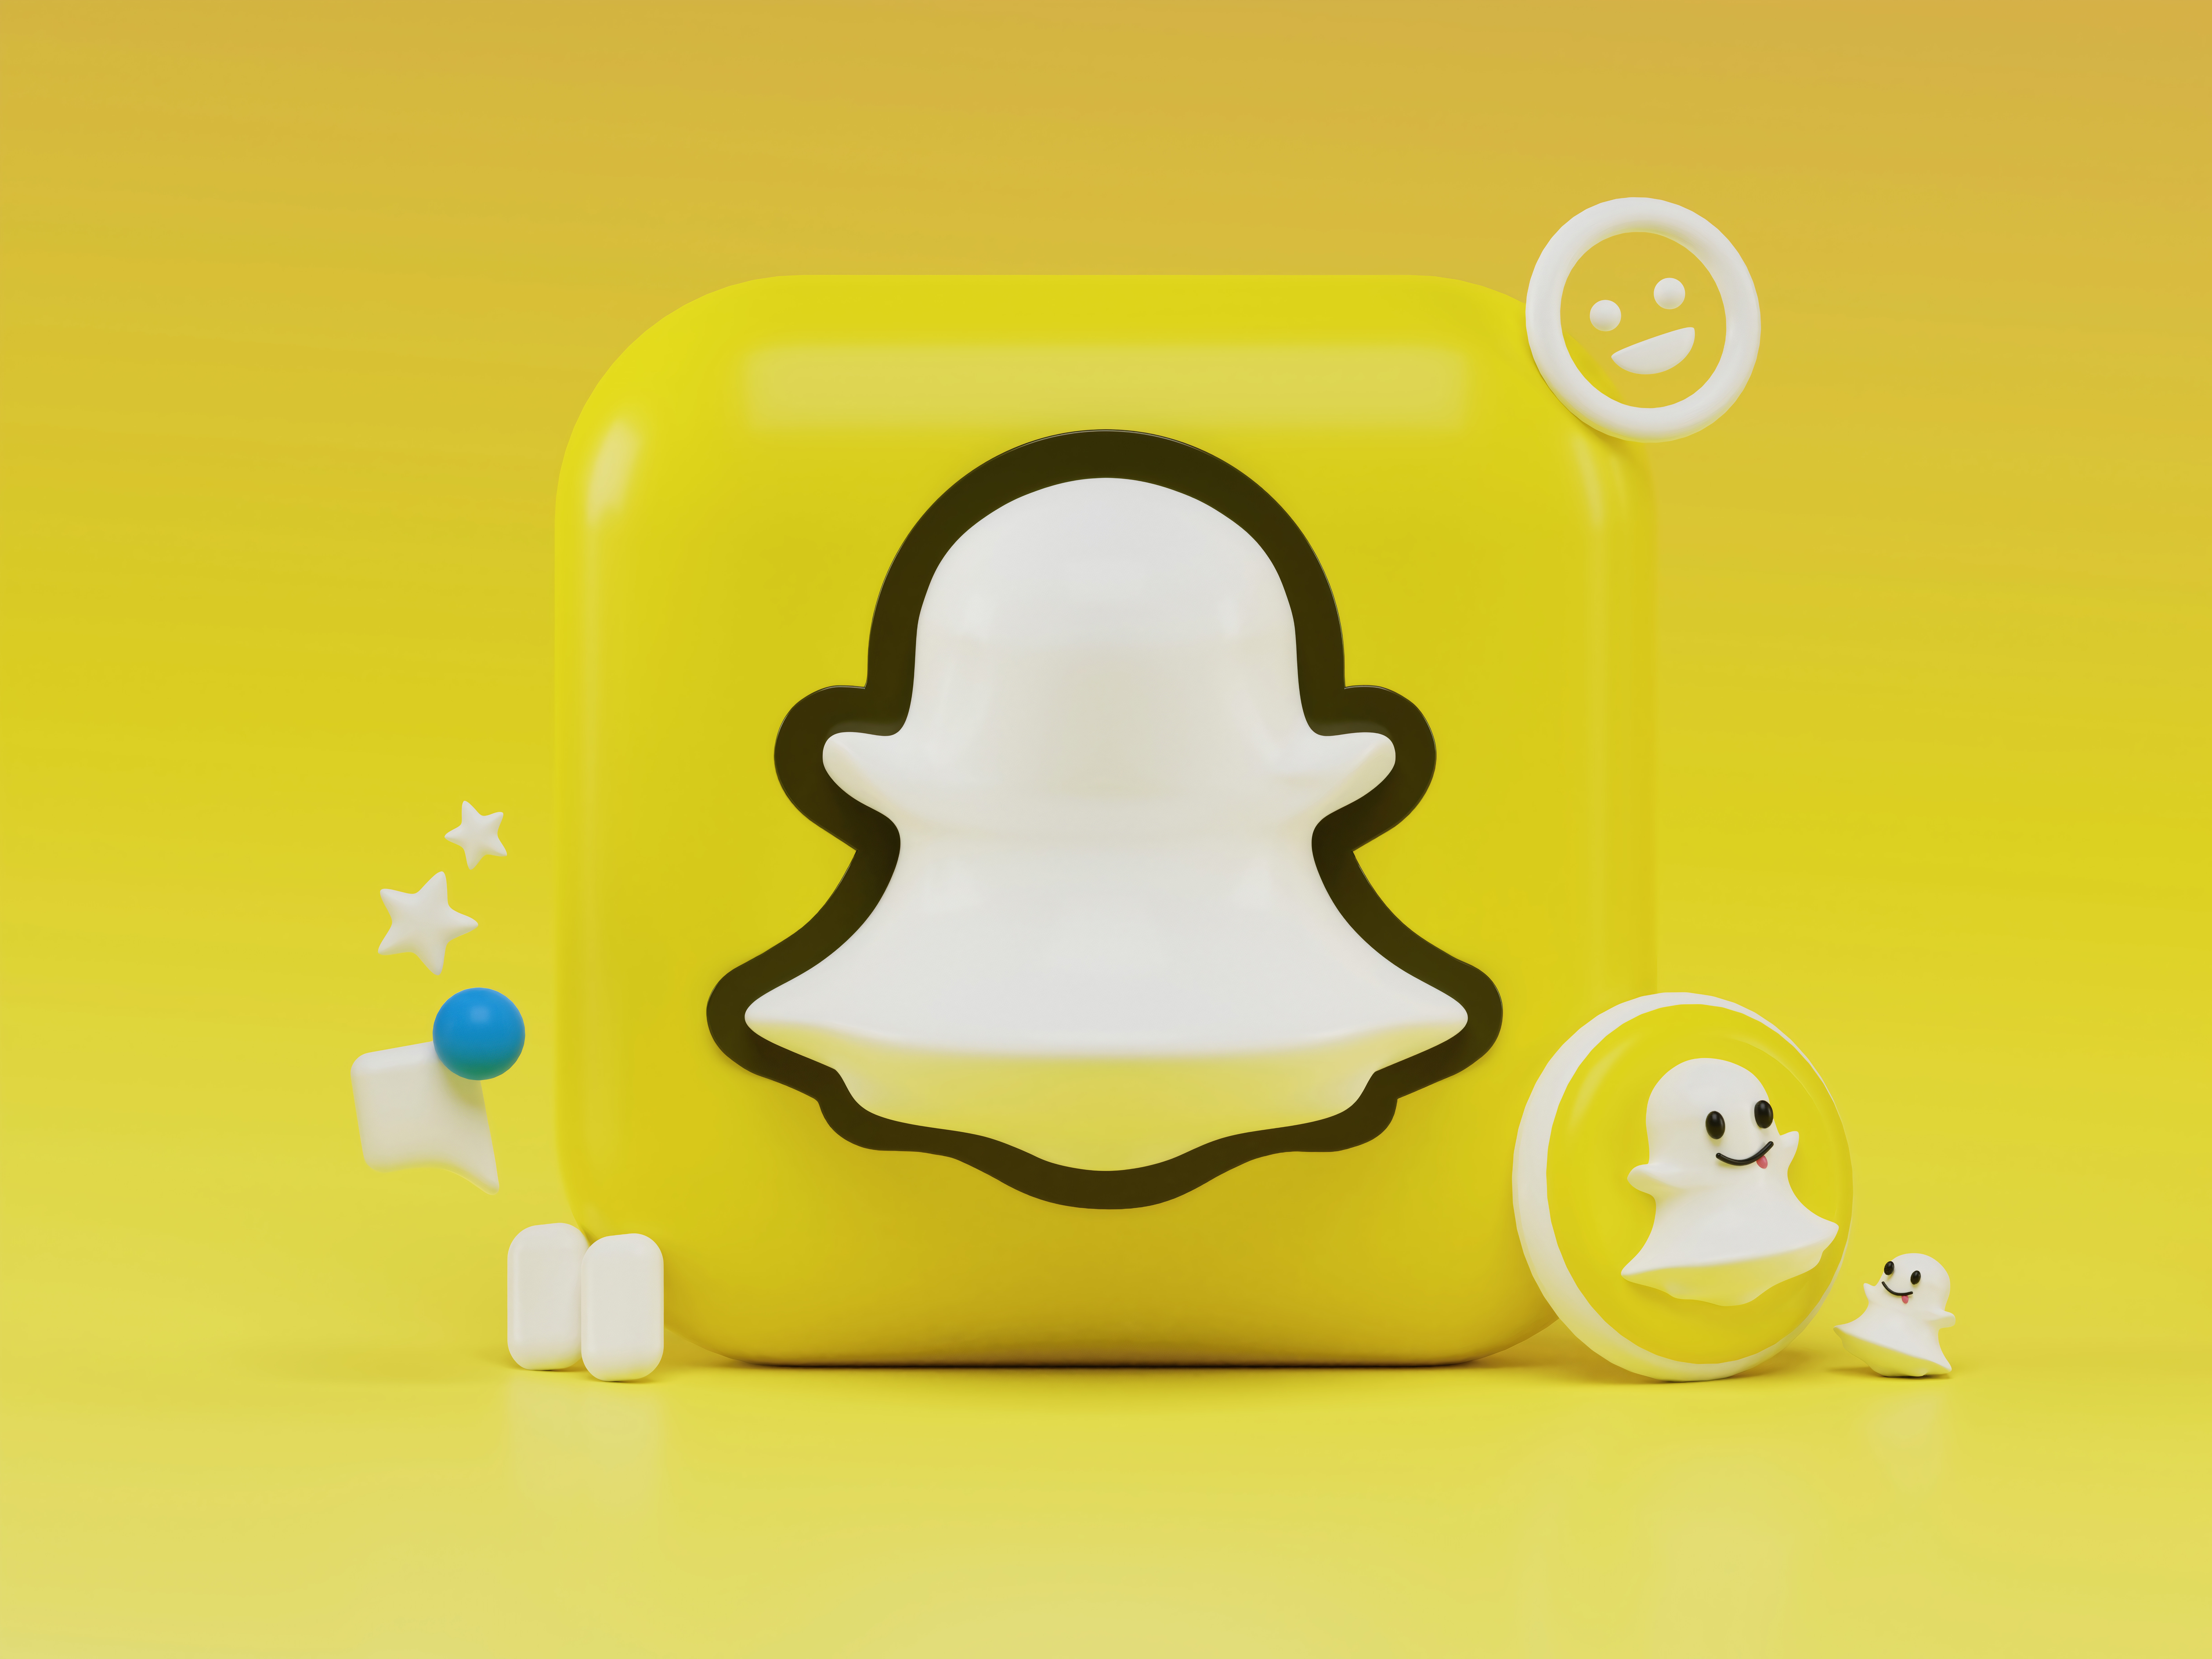 It’s Snapchat’s turn to get its own AI as “ChatGPT”!